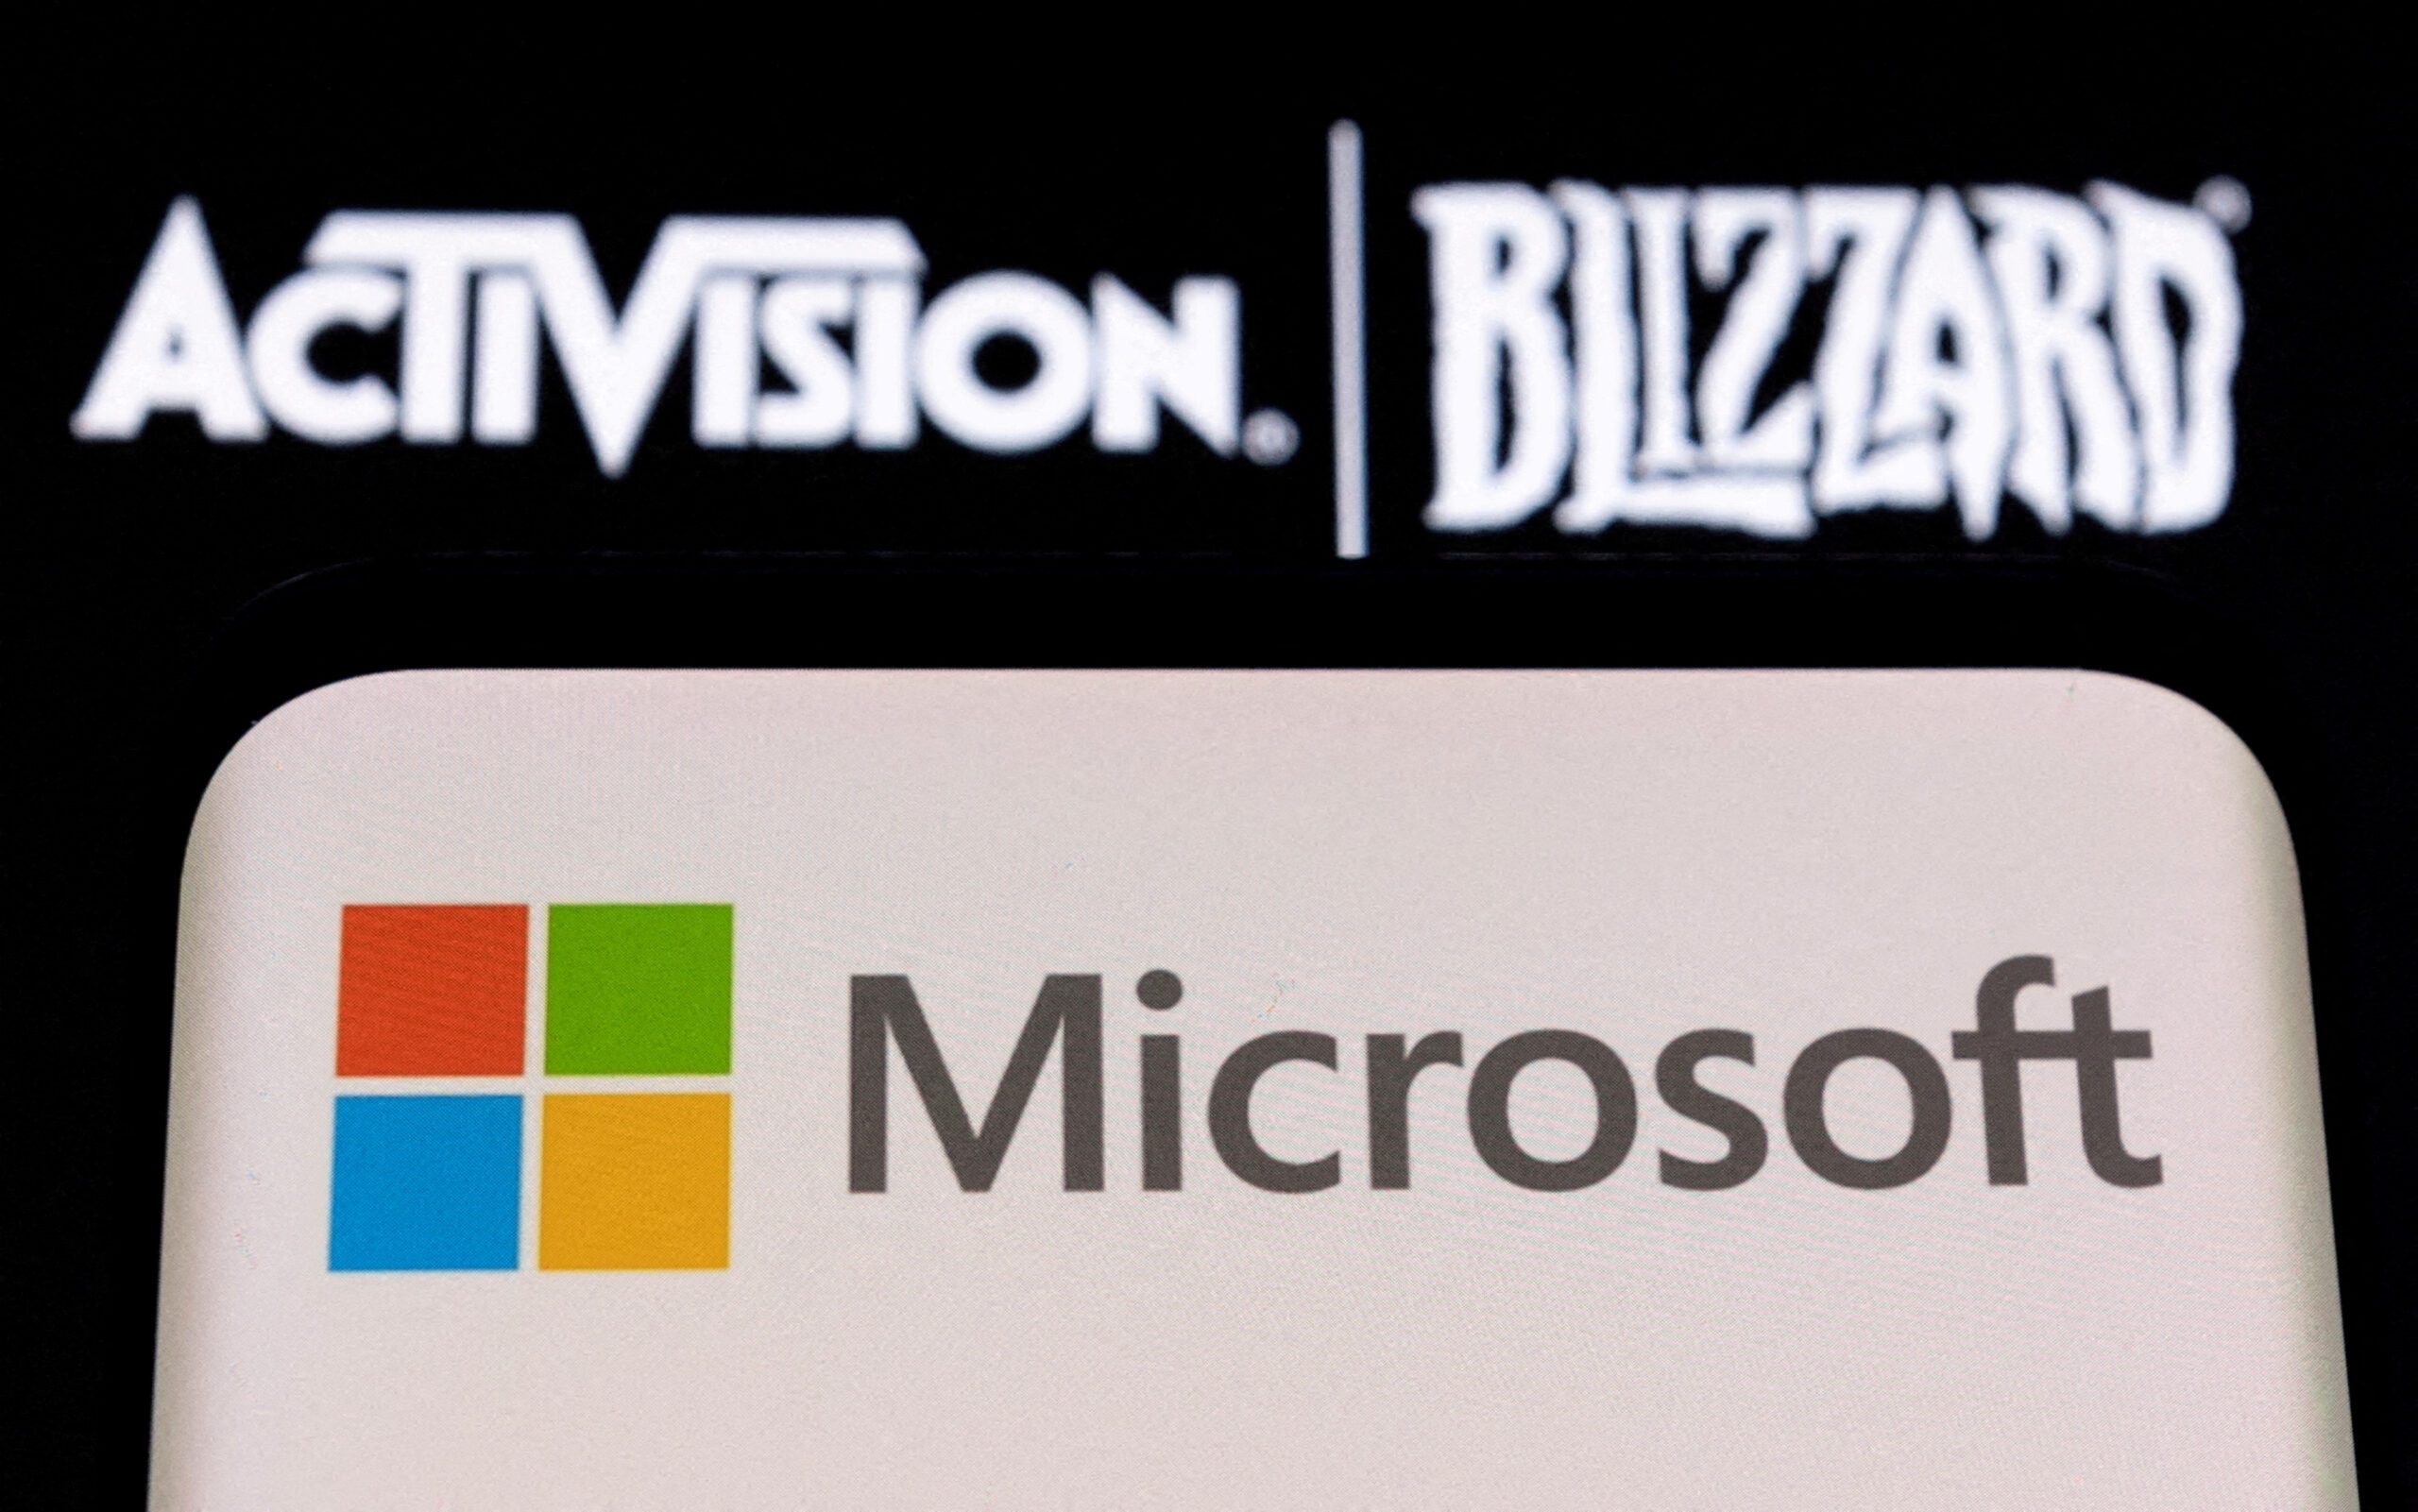 Microsoft tells judges its $69-B Activision deal would benefit gamers